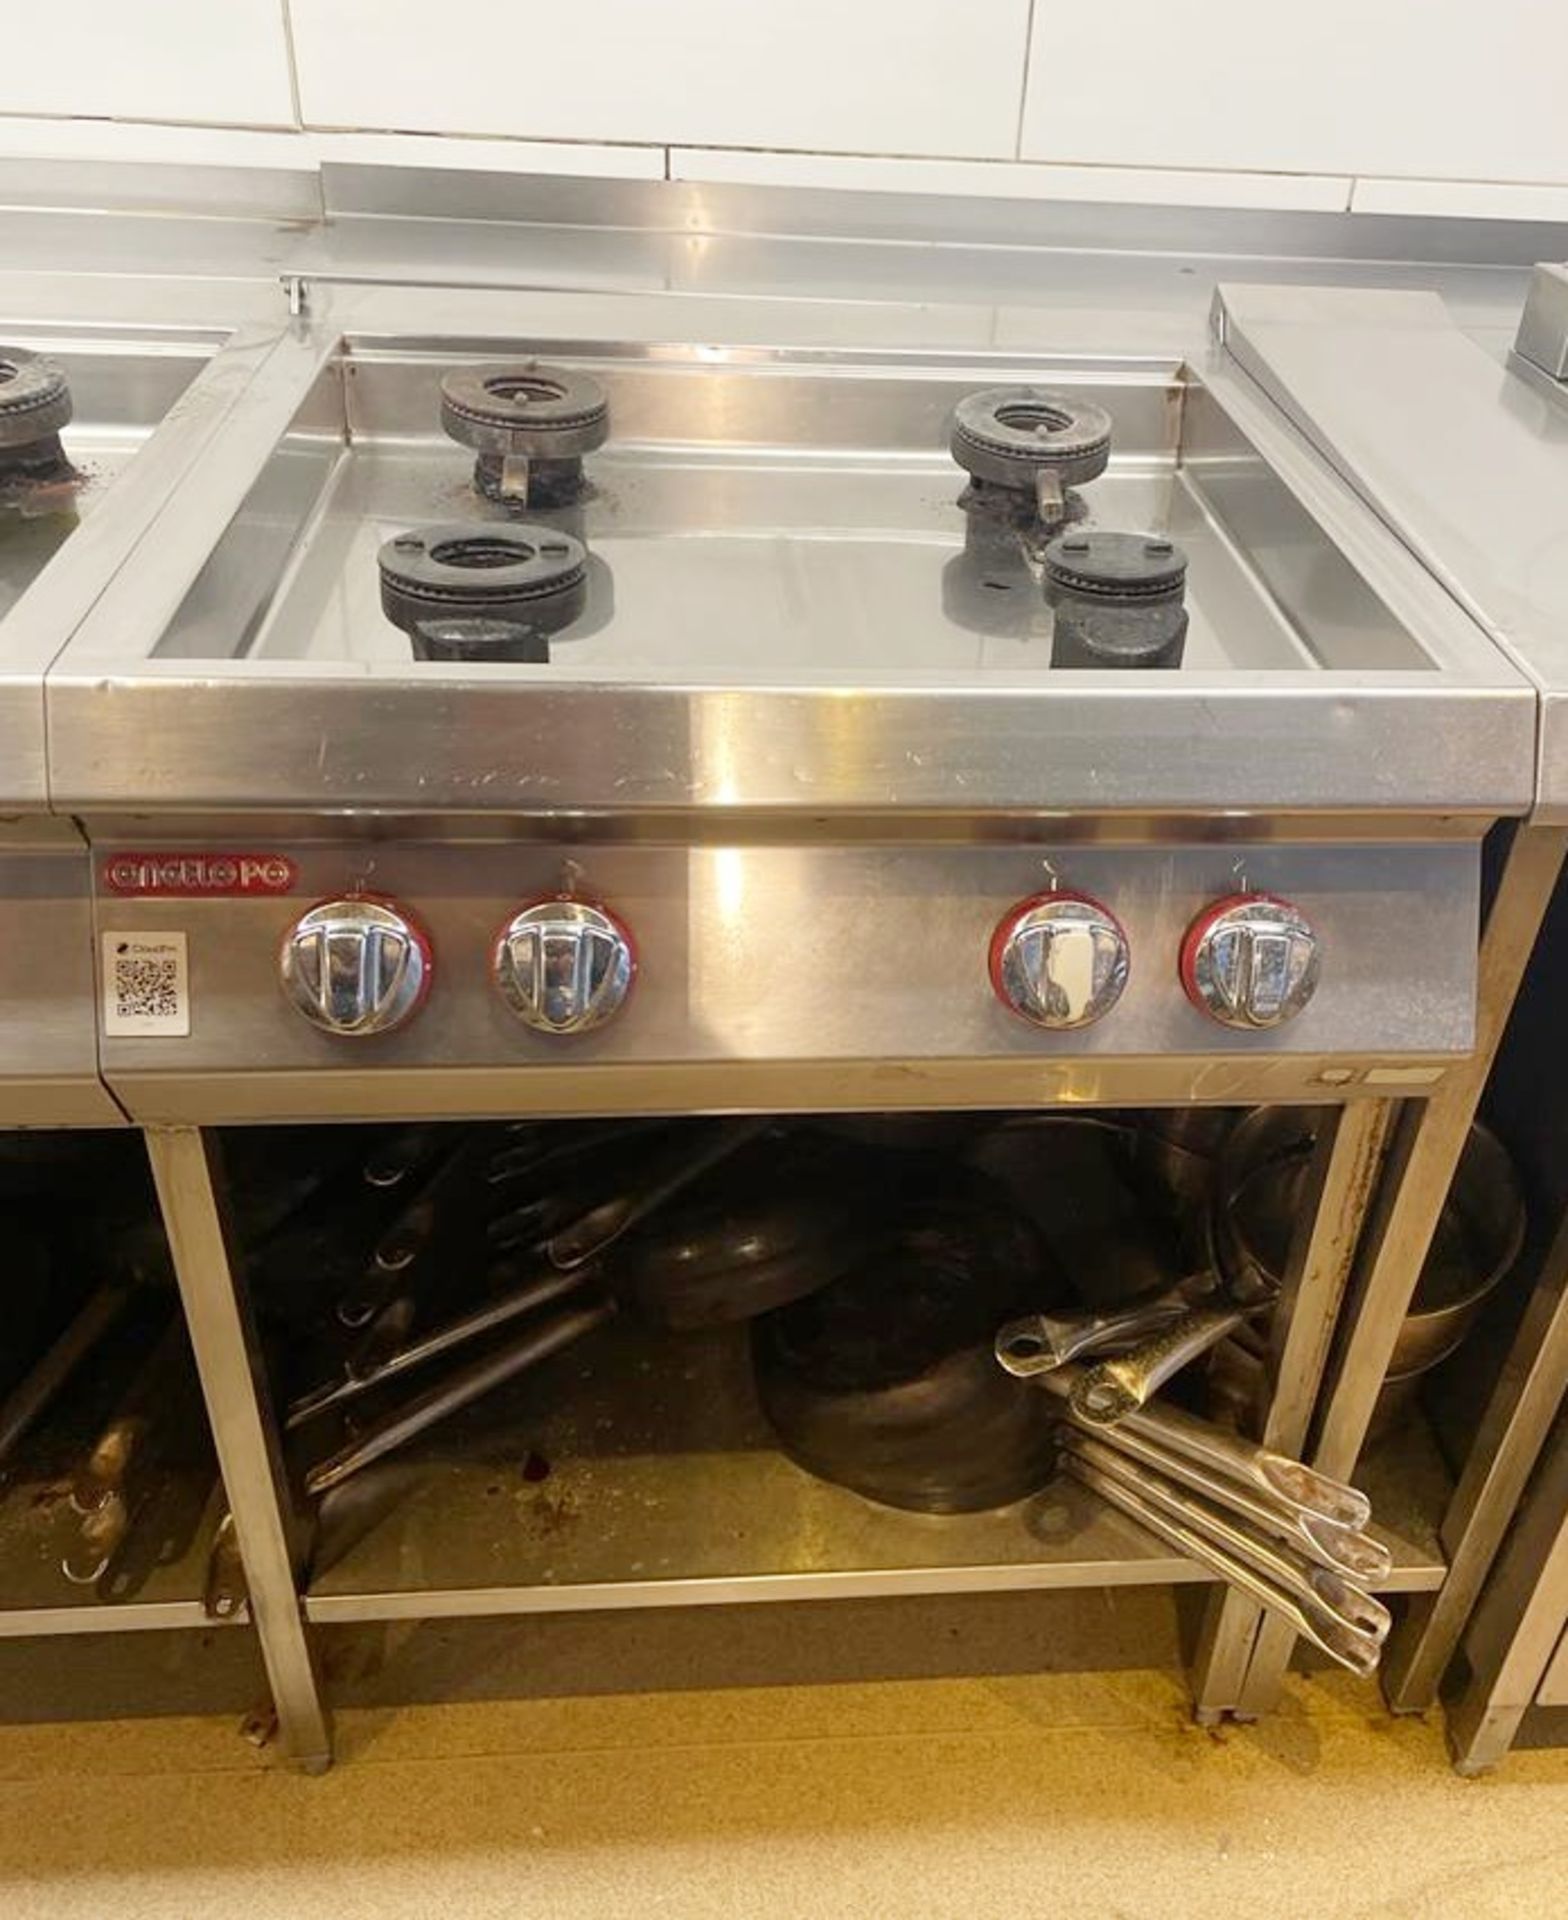 1 x Angelo Po 6 Burner Gas Fired Range Cooker With Stainless Steel Exterior - Image 7 of 9